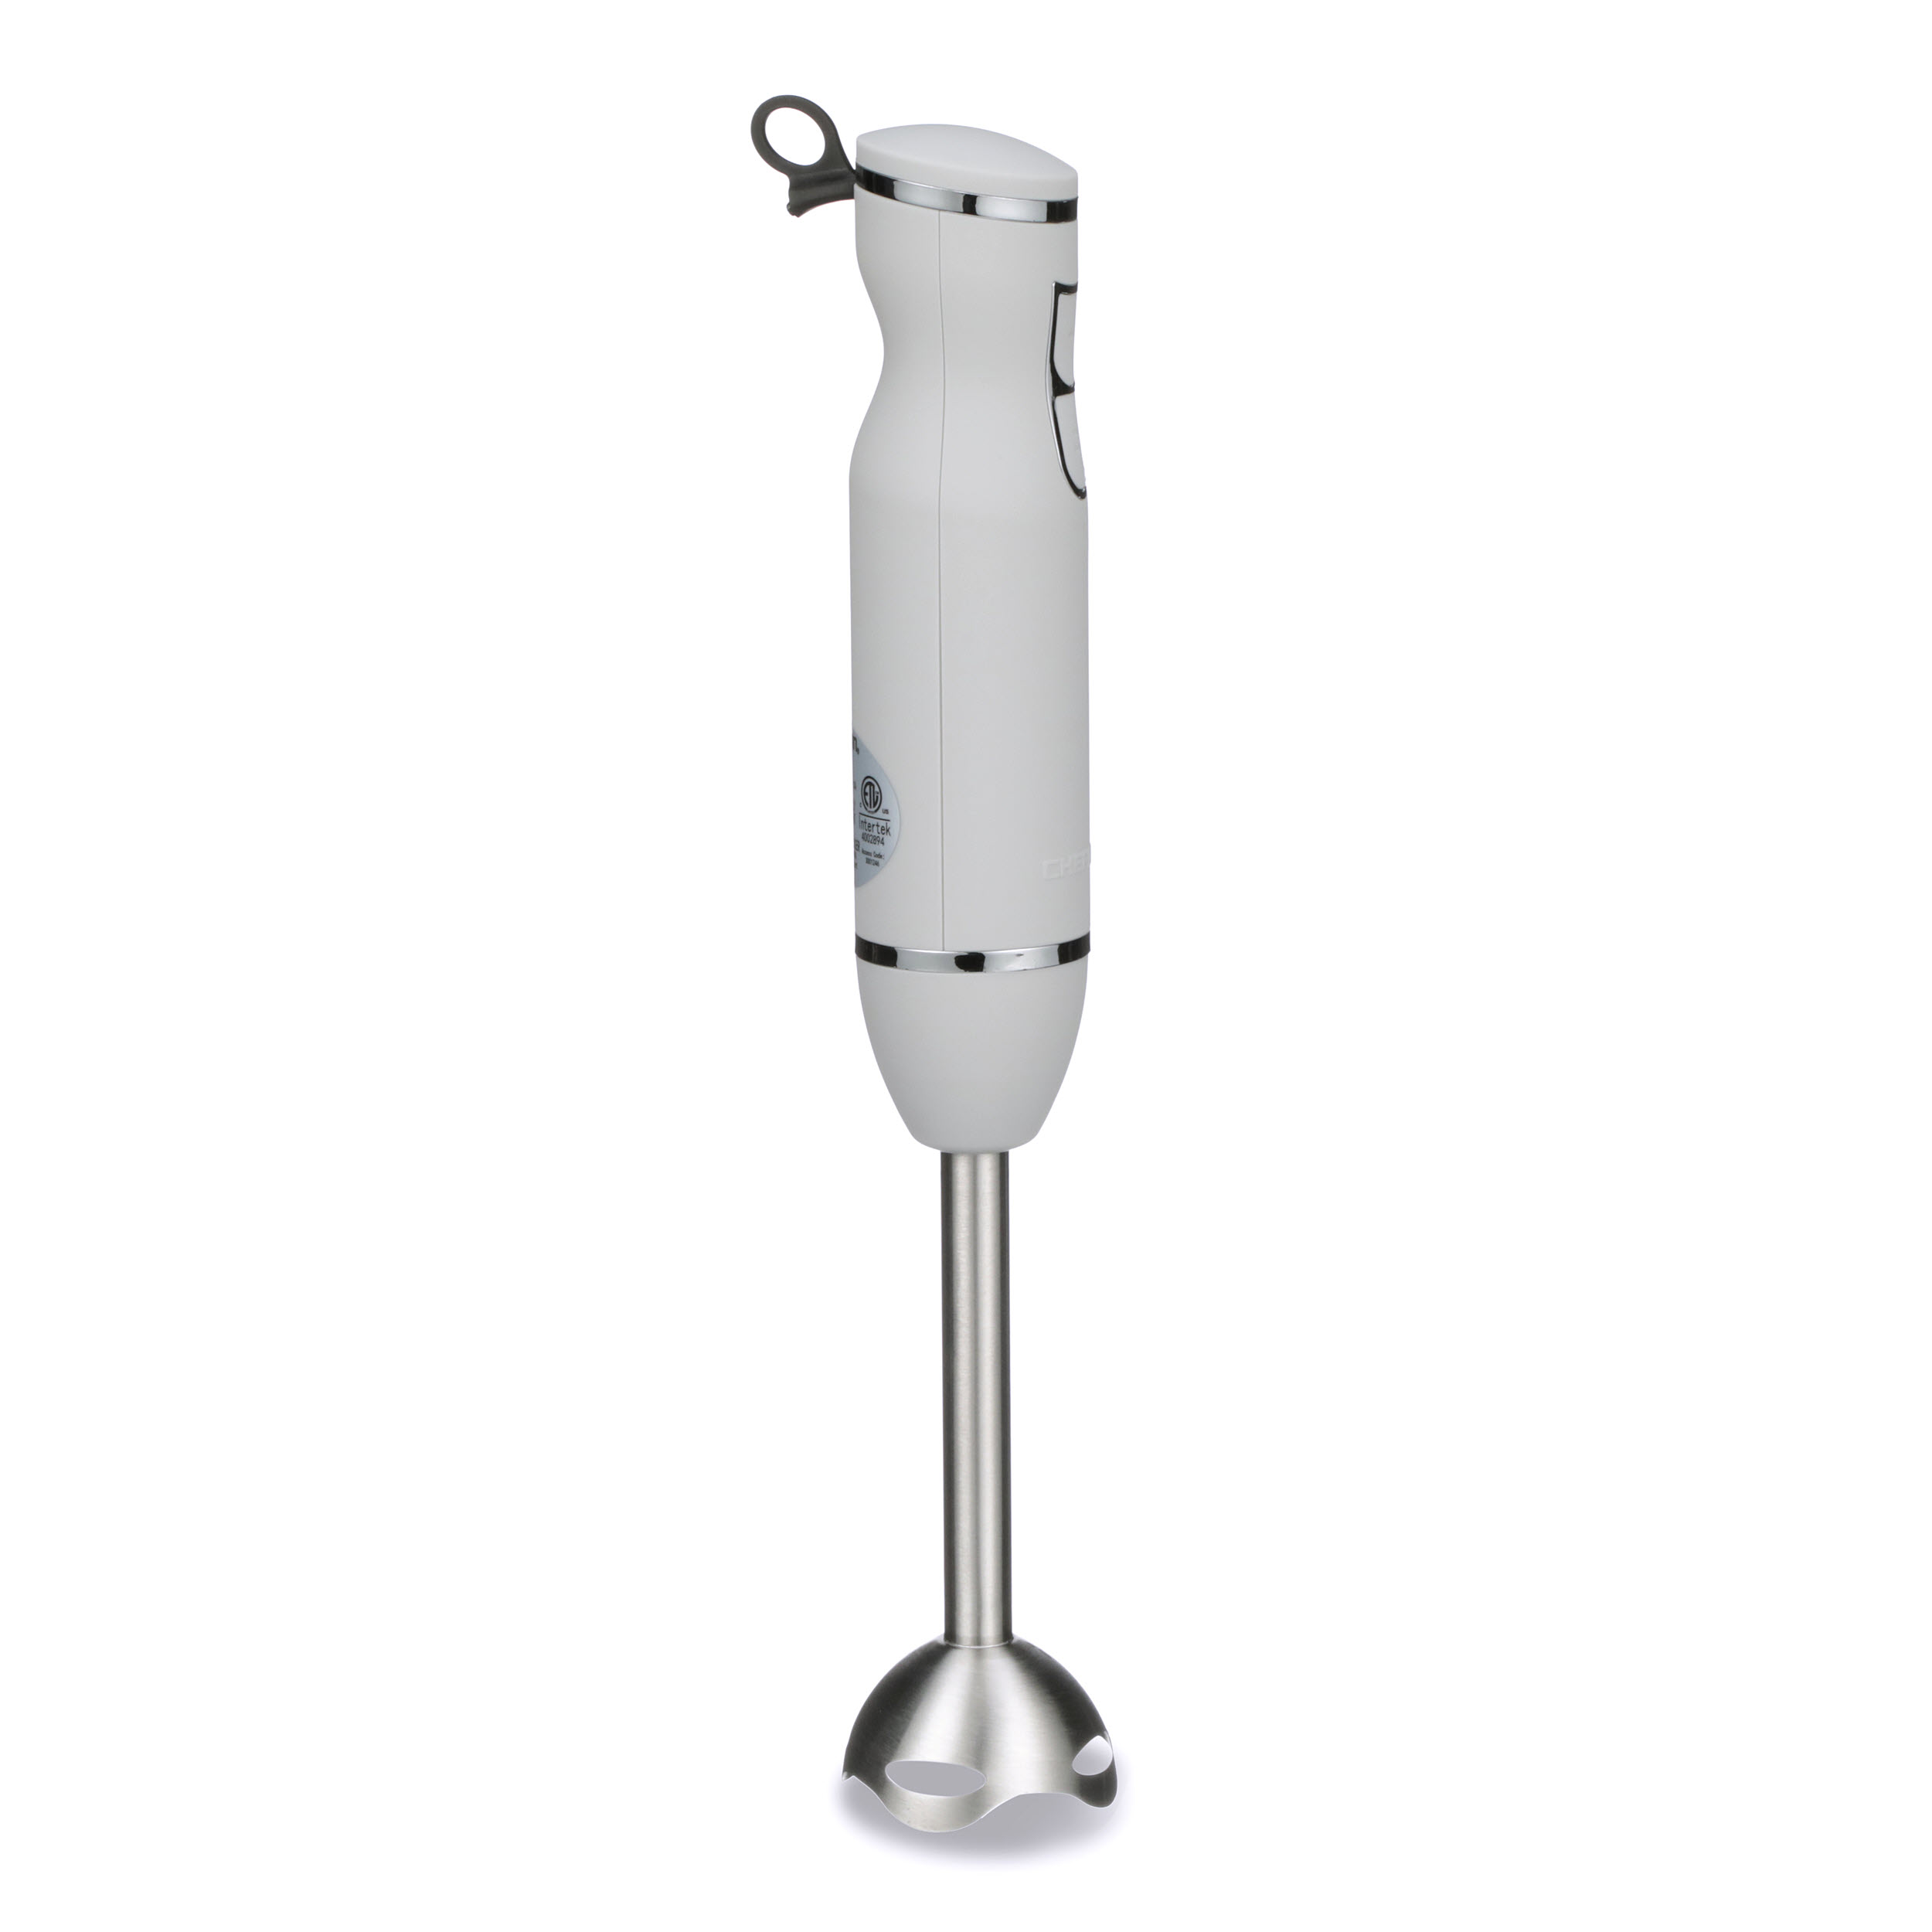 CHEFMAN RNAB08KWK1X9Y chefman immersion stick hand blender powerful  electric ice crushing 2-speed control handheld food mixer, purees,  smoothies, s